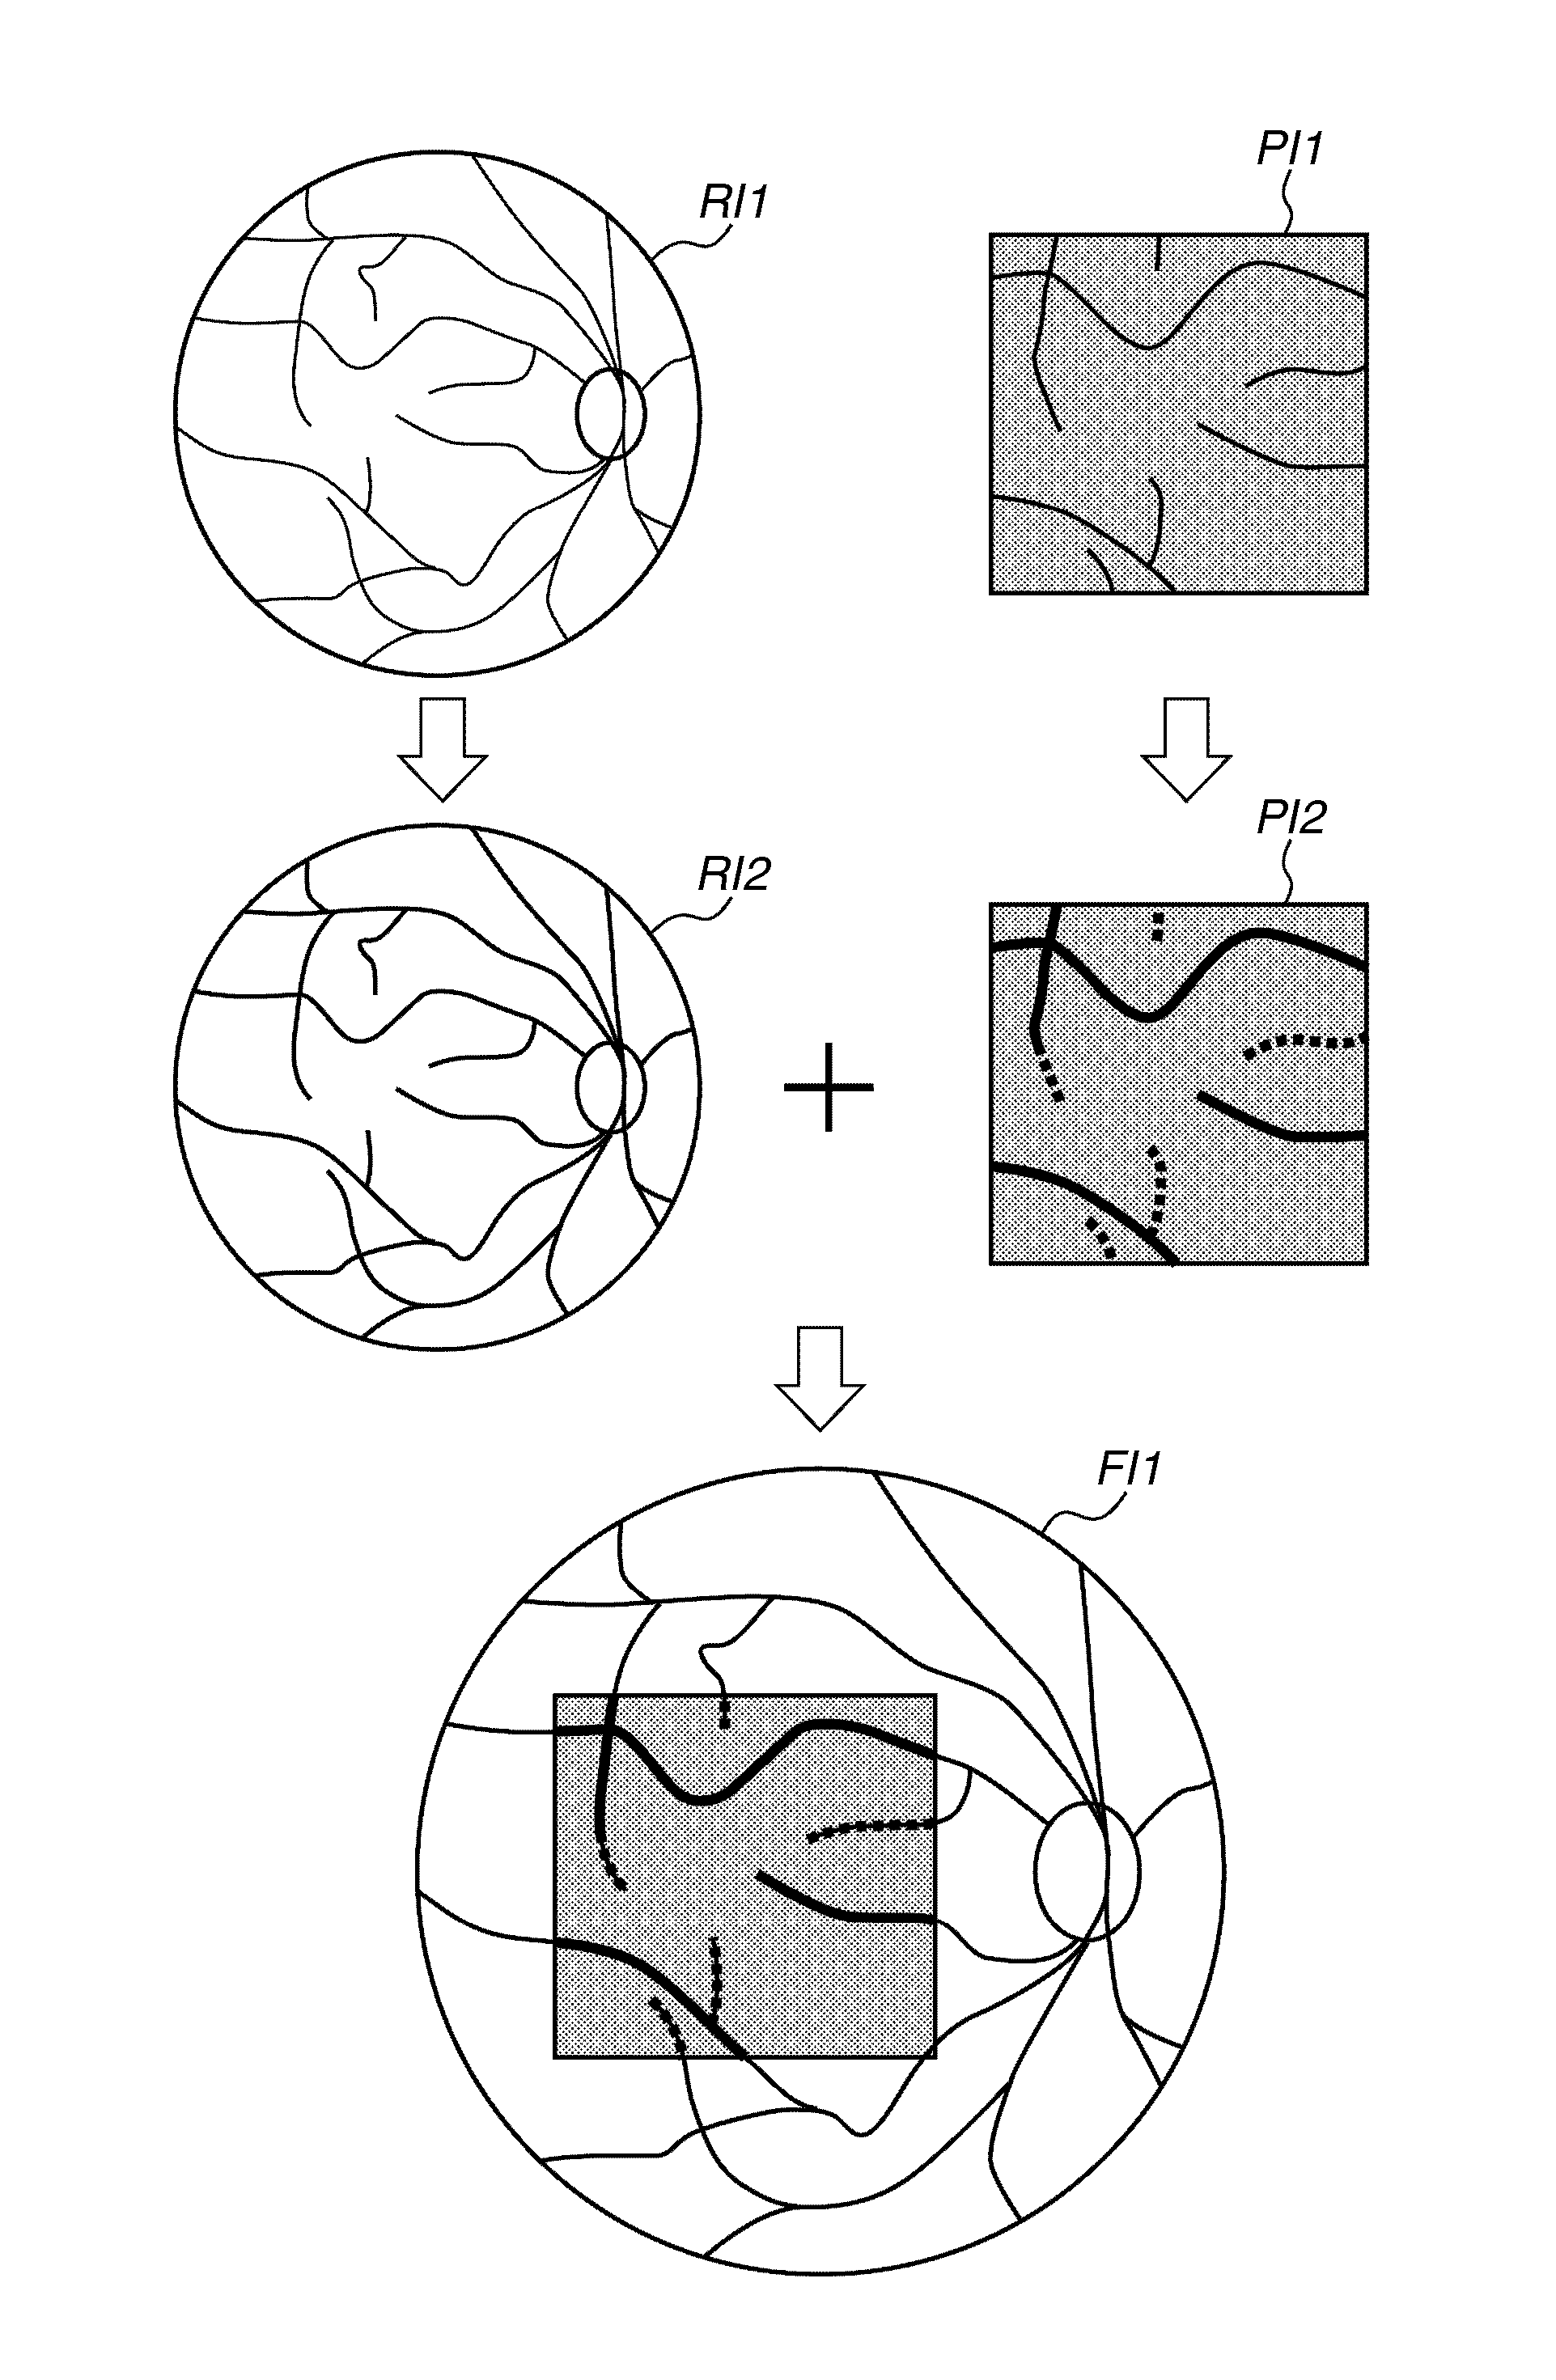 Image processing apparatus, image processing method, image processing system, and computer readable memory